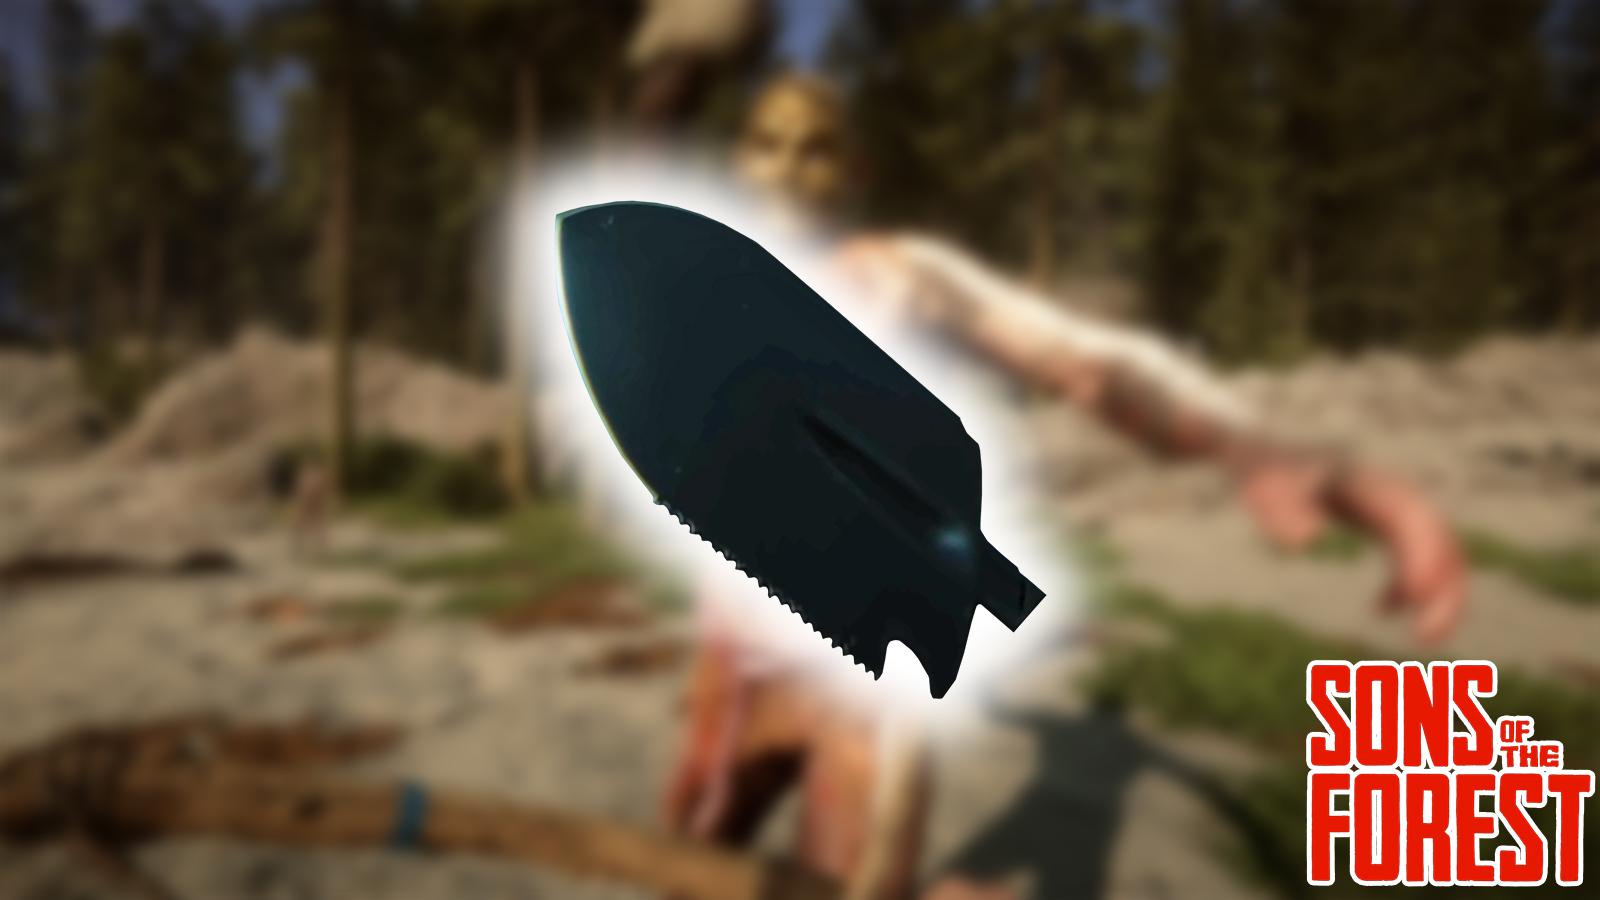 a shovel in Sons of the Forest